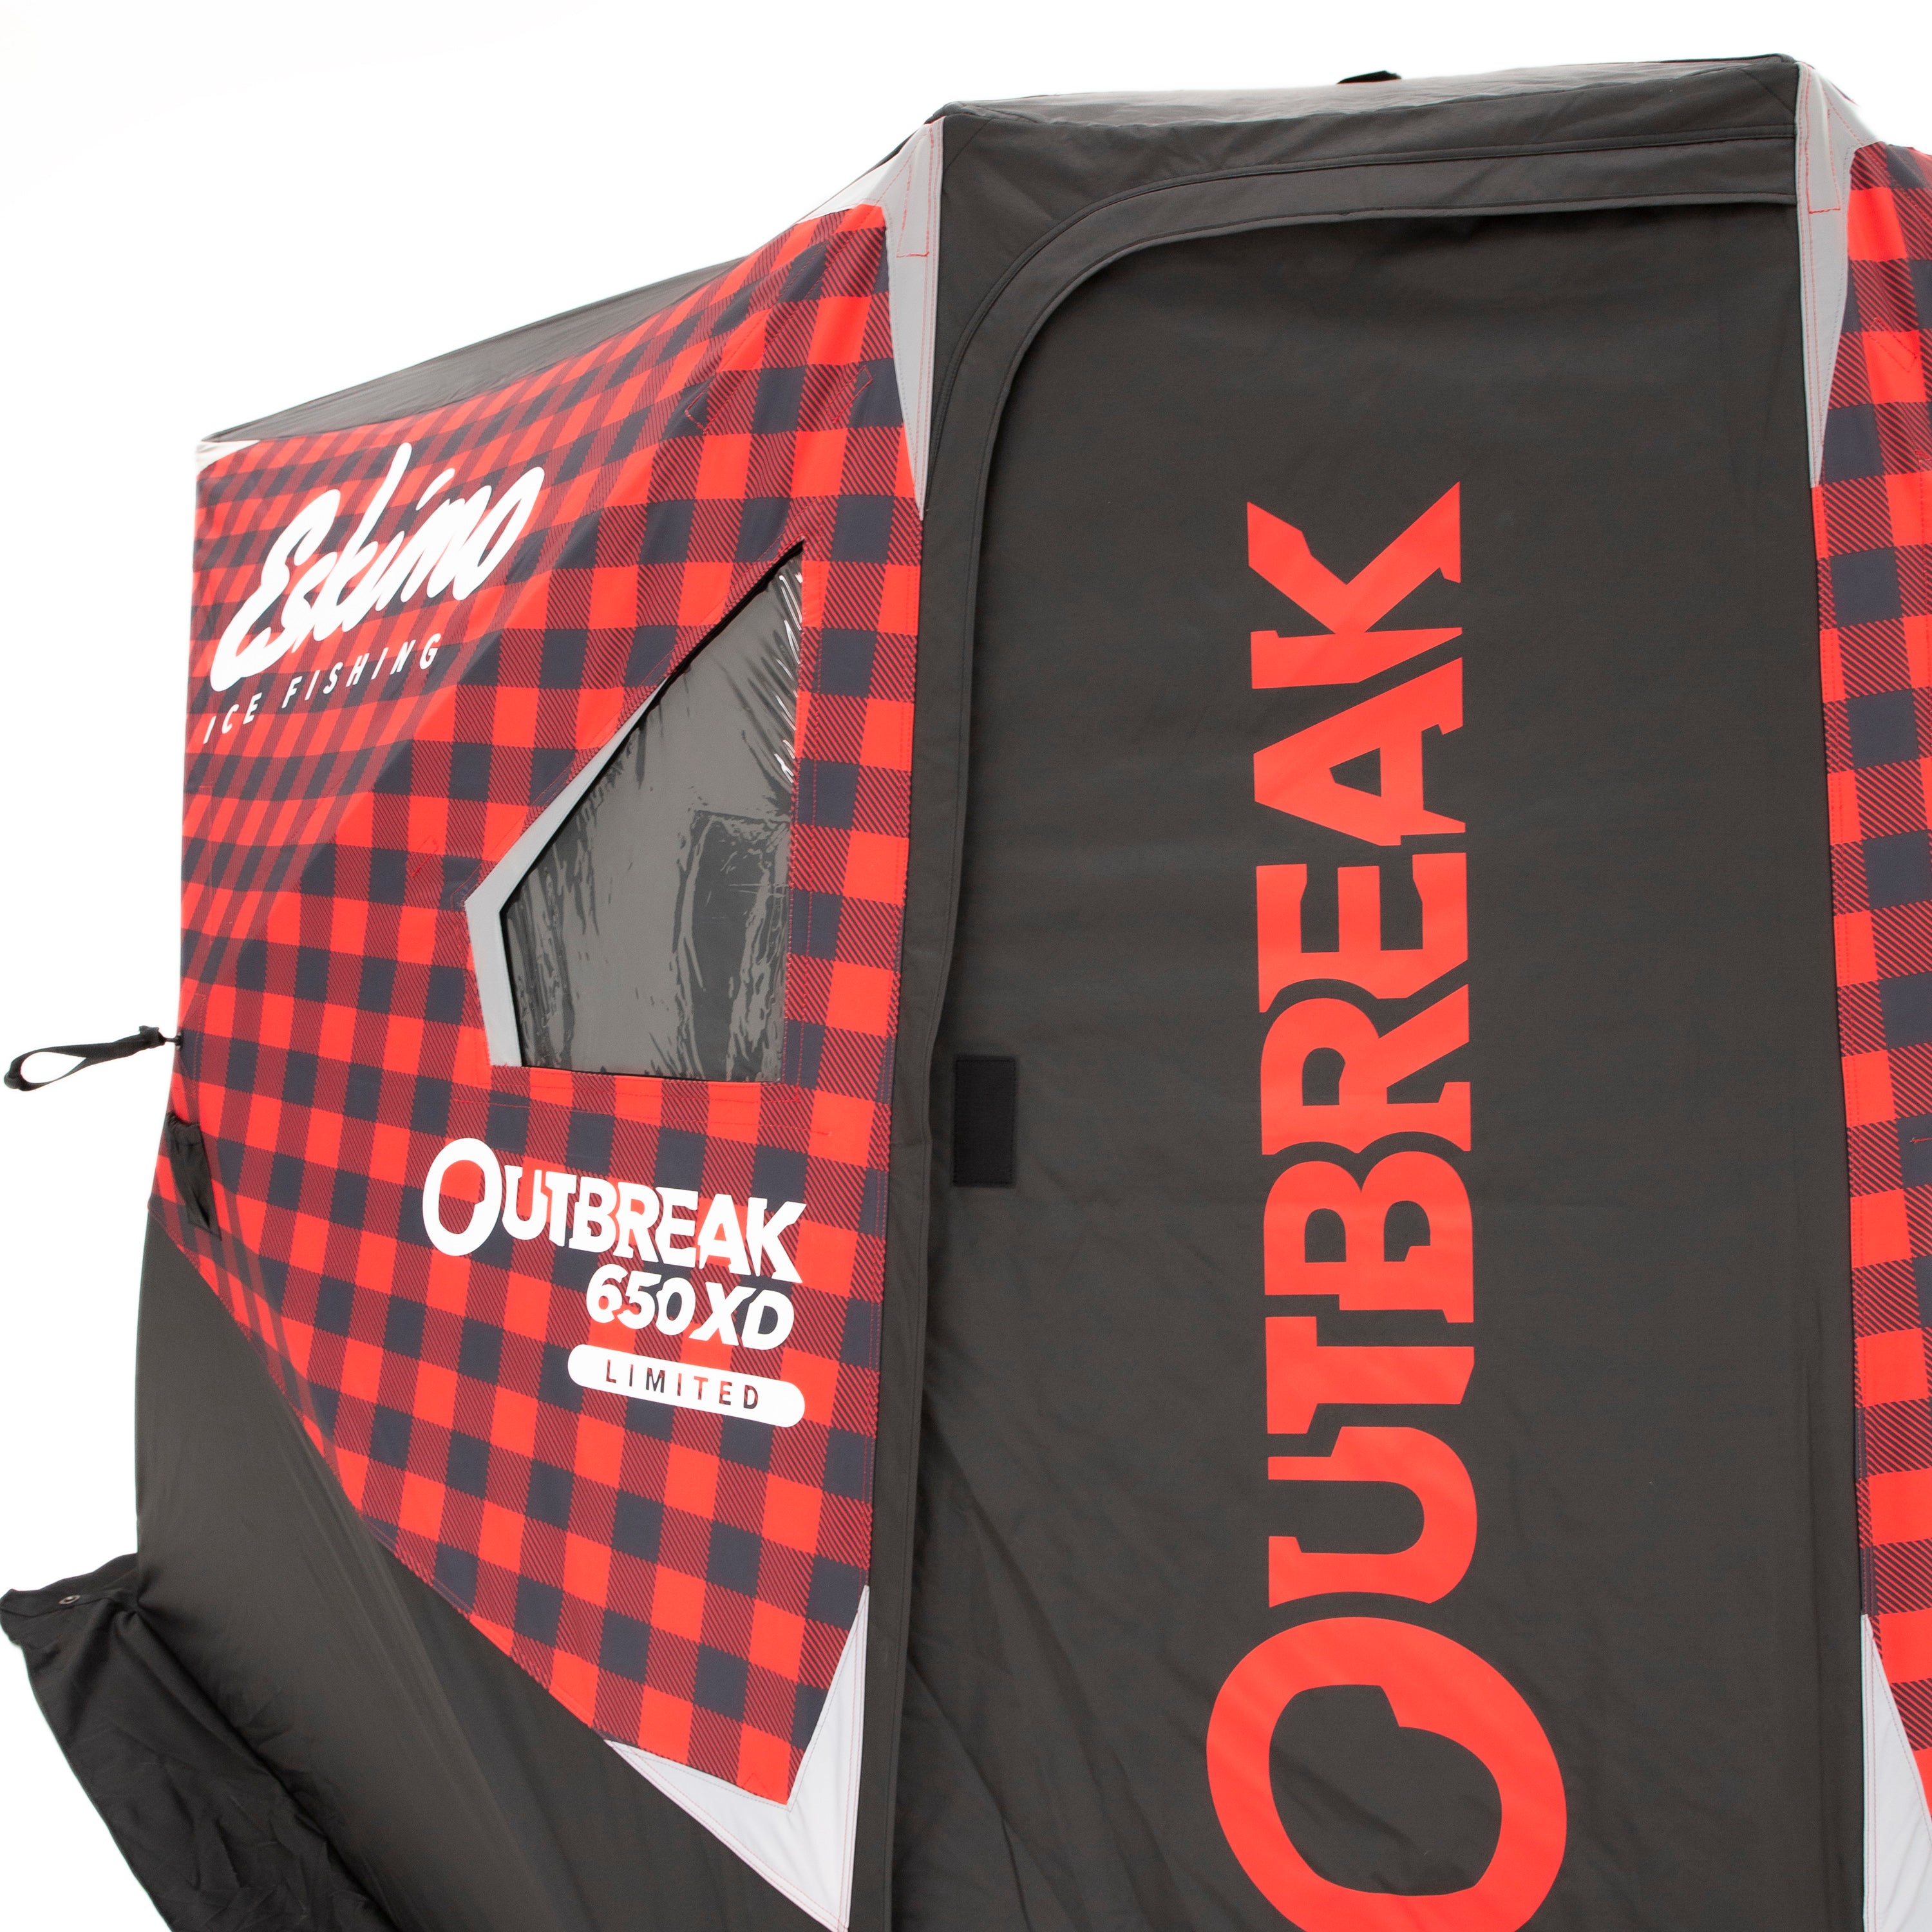 Outbreak 650XD Limited